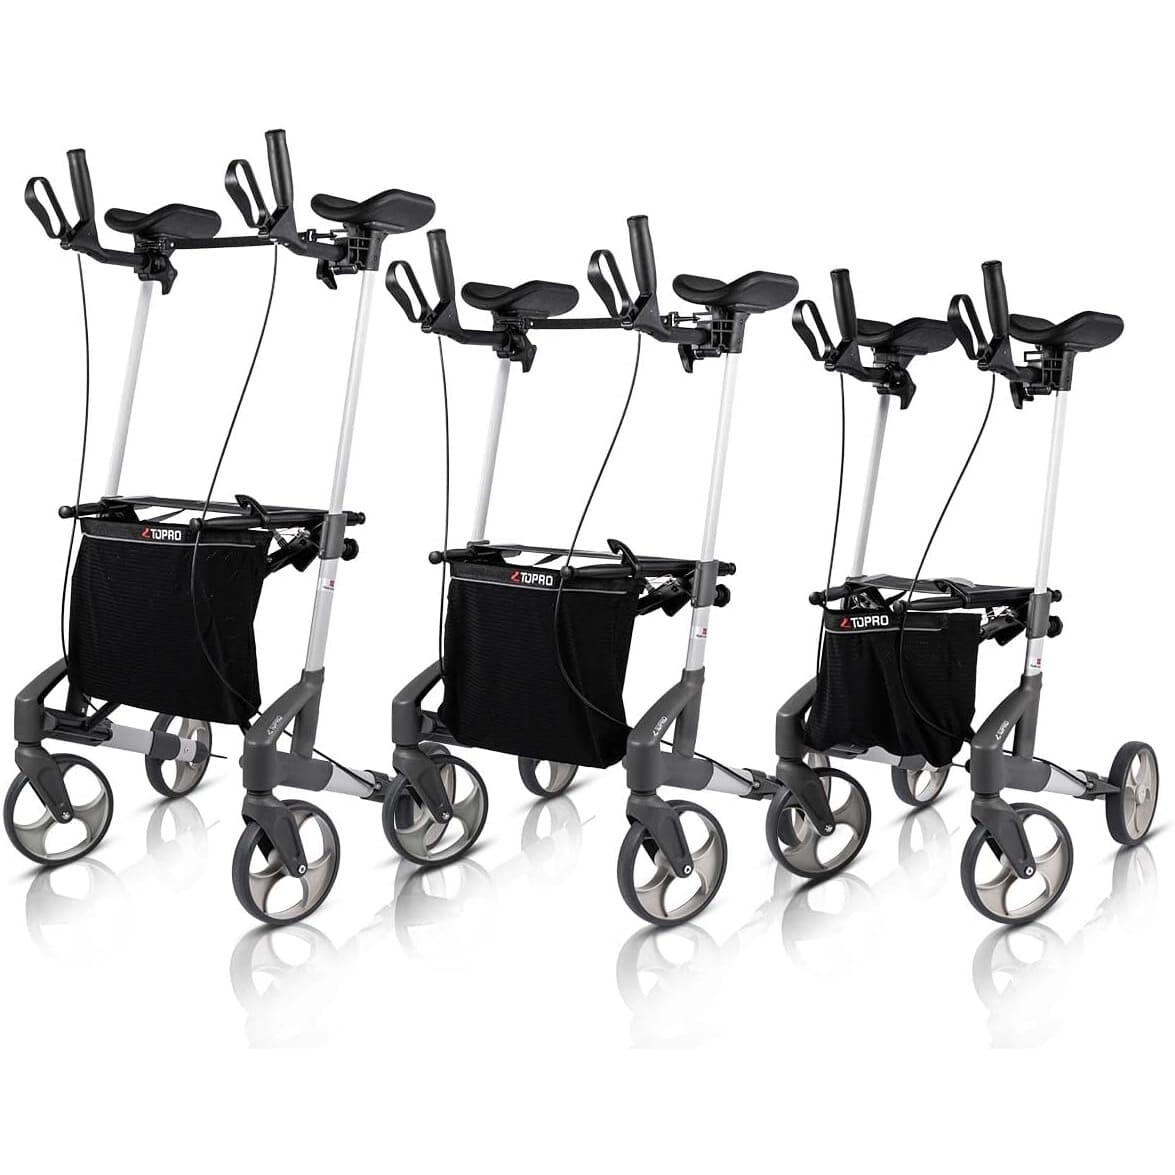 View Troja Forearm Rollator Extra Small information